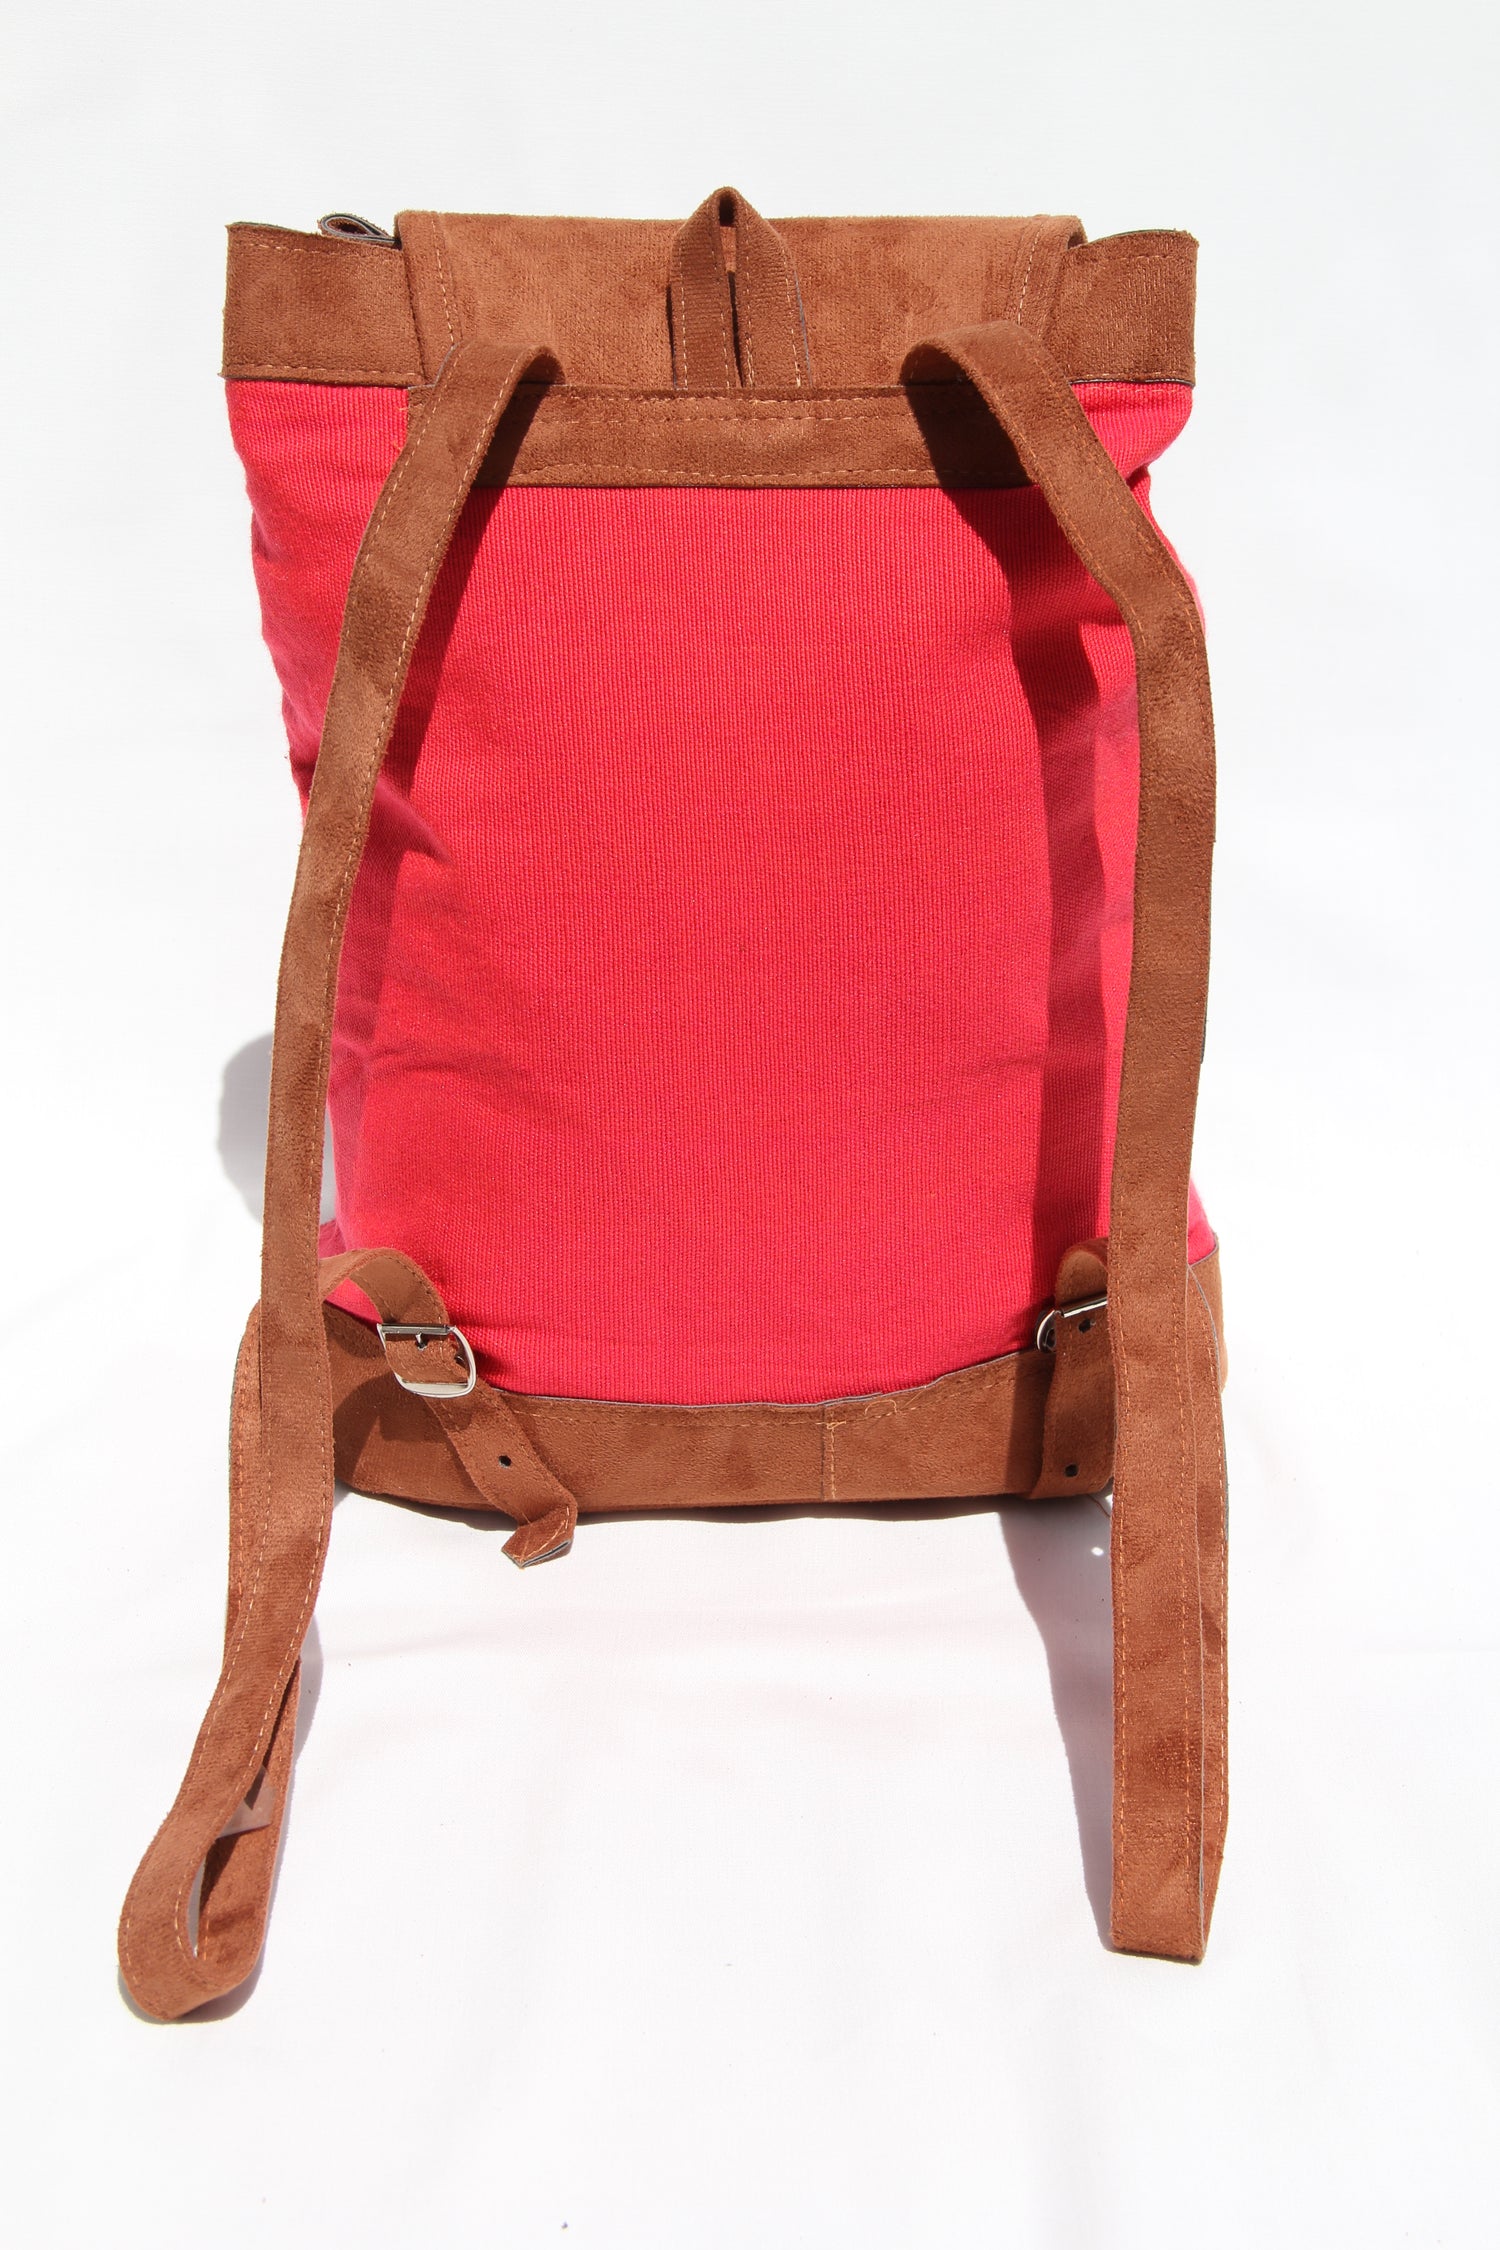 This is the backside of the backpack. It's placed on a solid white background. The back side of the bag is solid corral and it includes two brown faux suede shoulder straps. They can be adjusted to whatever length you'd like. 